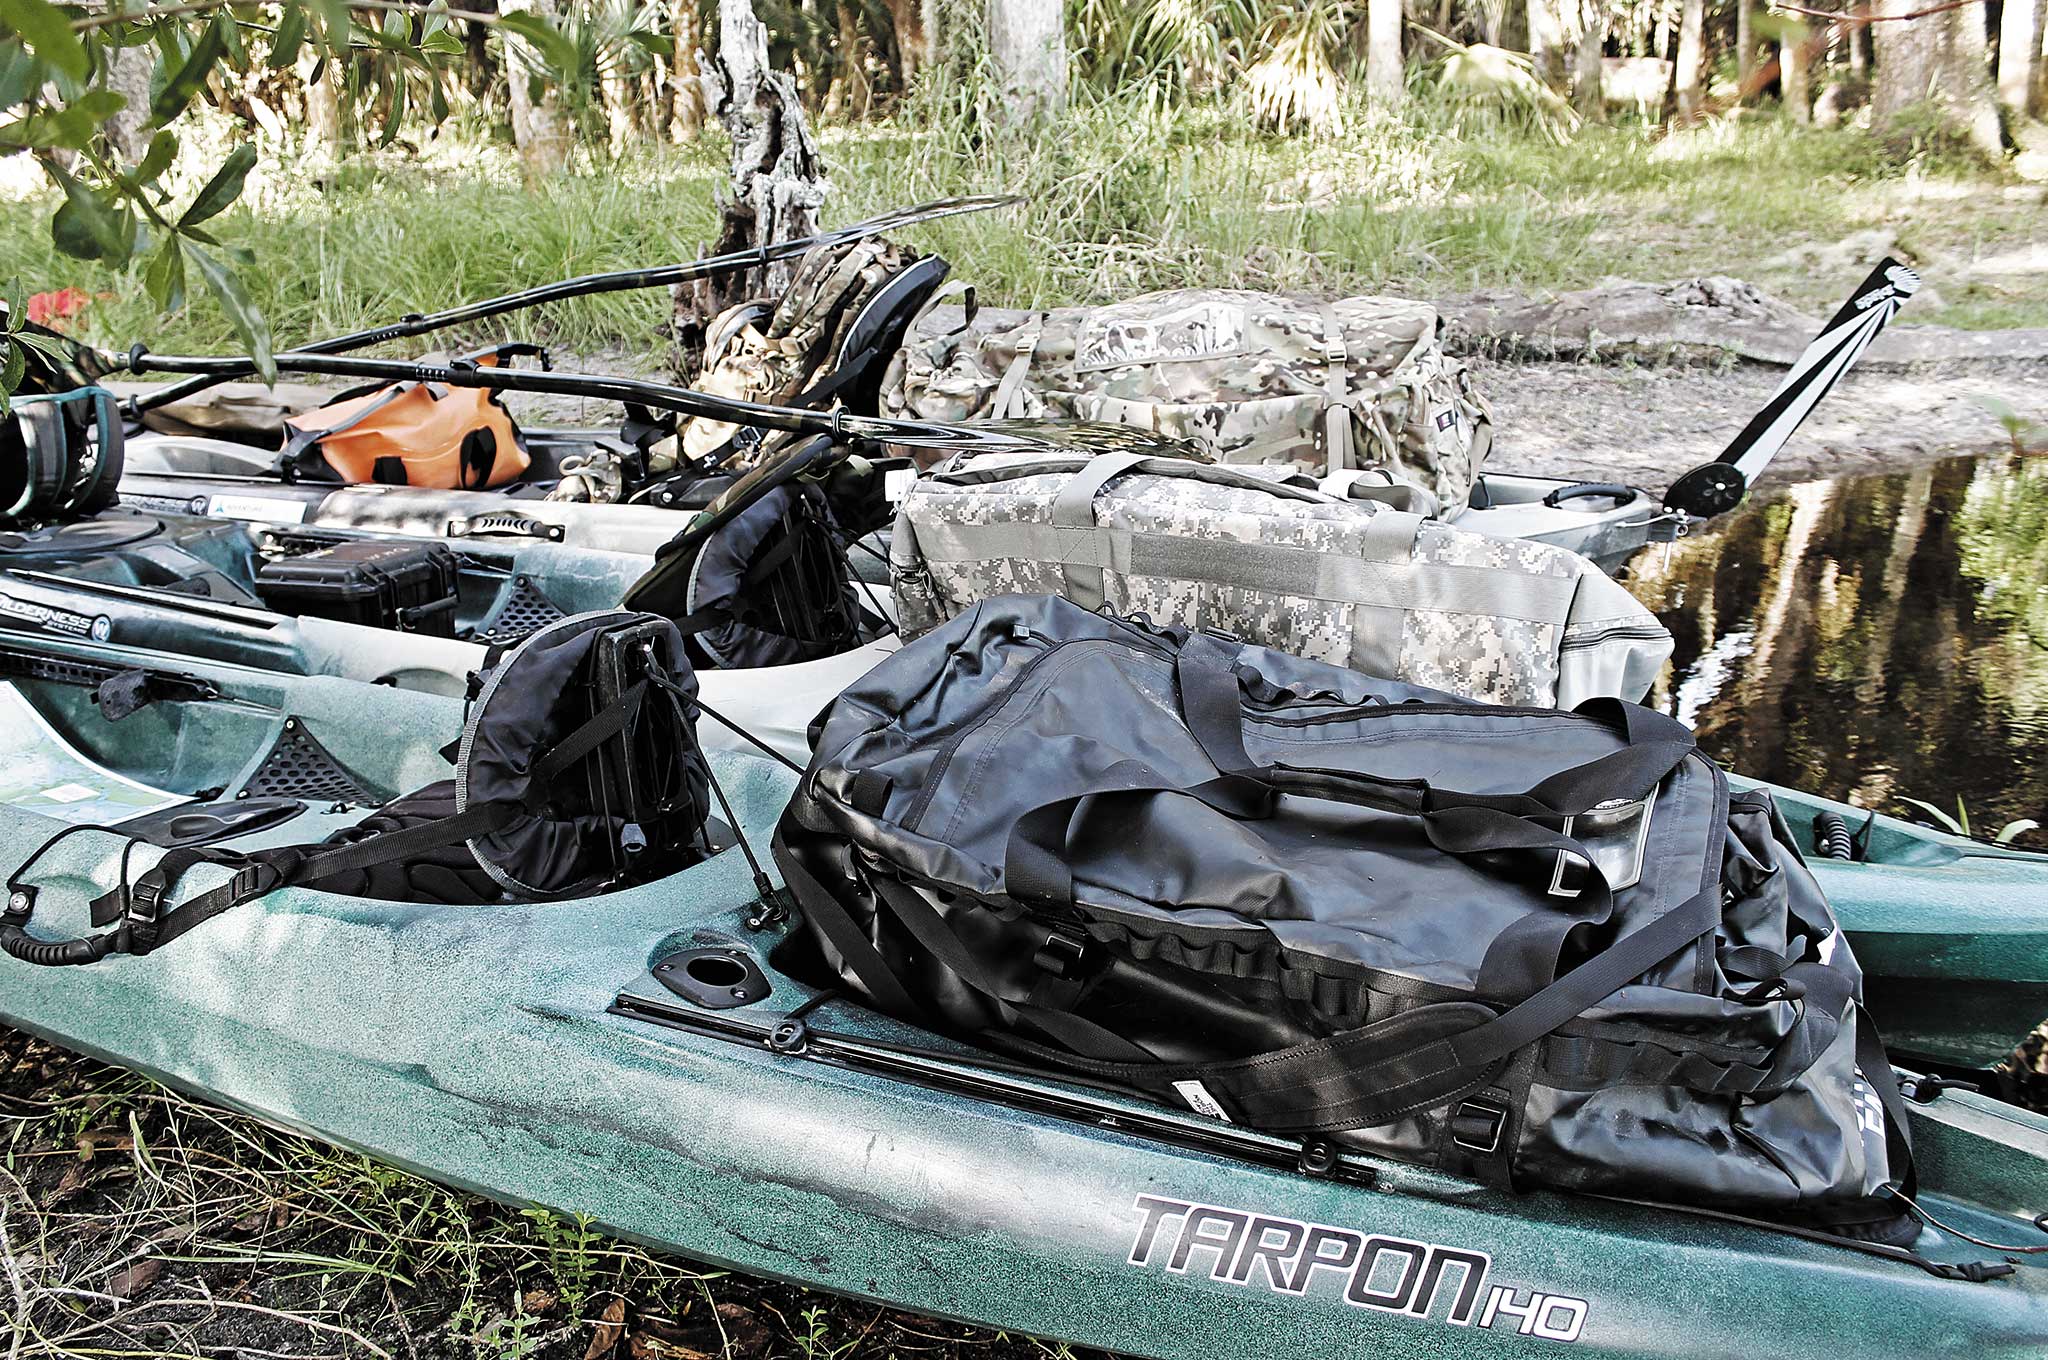 You can fit a surprising amount of gear on a kayak.